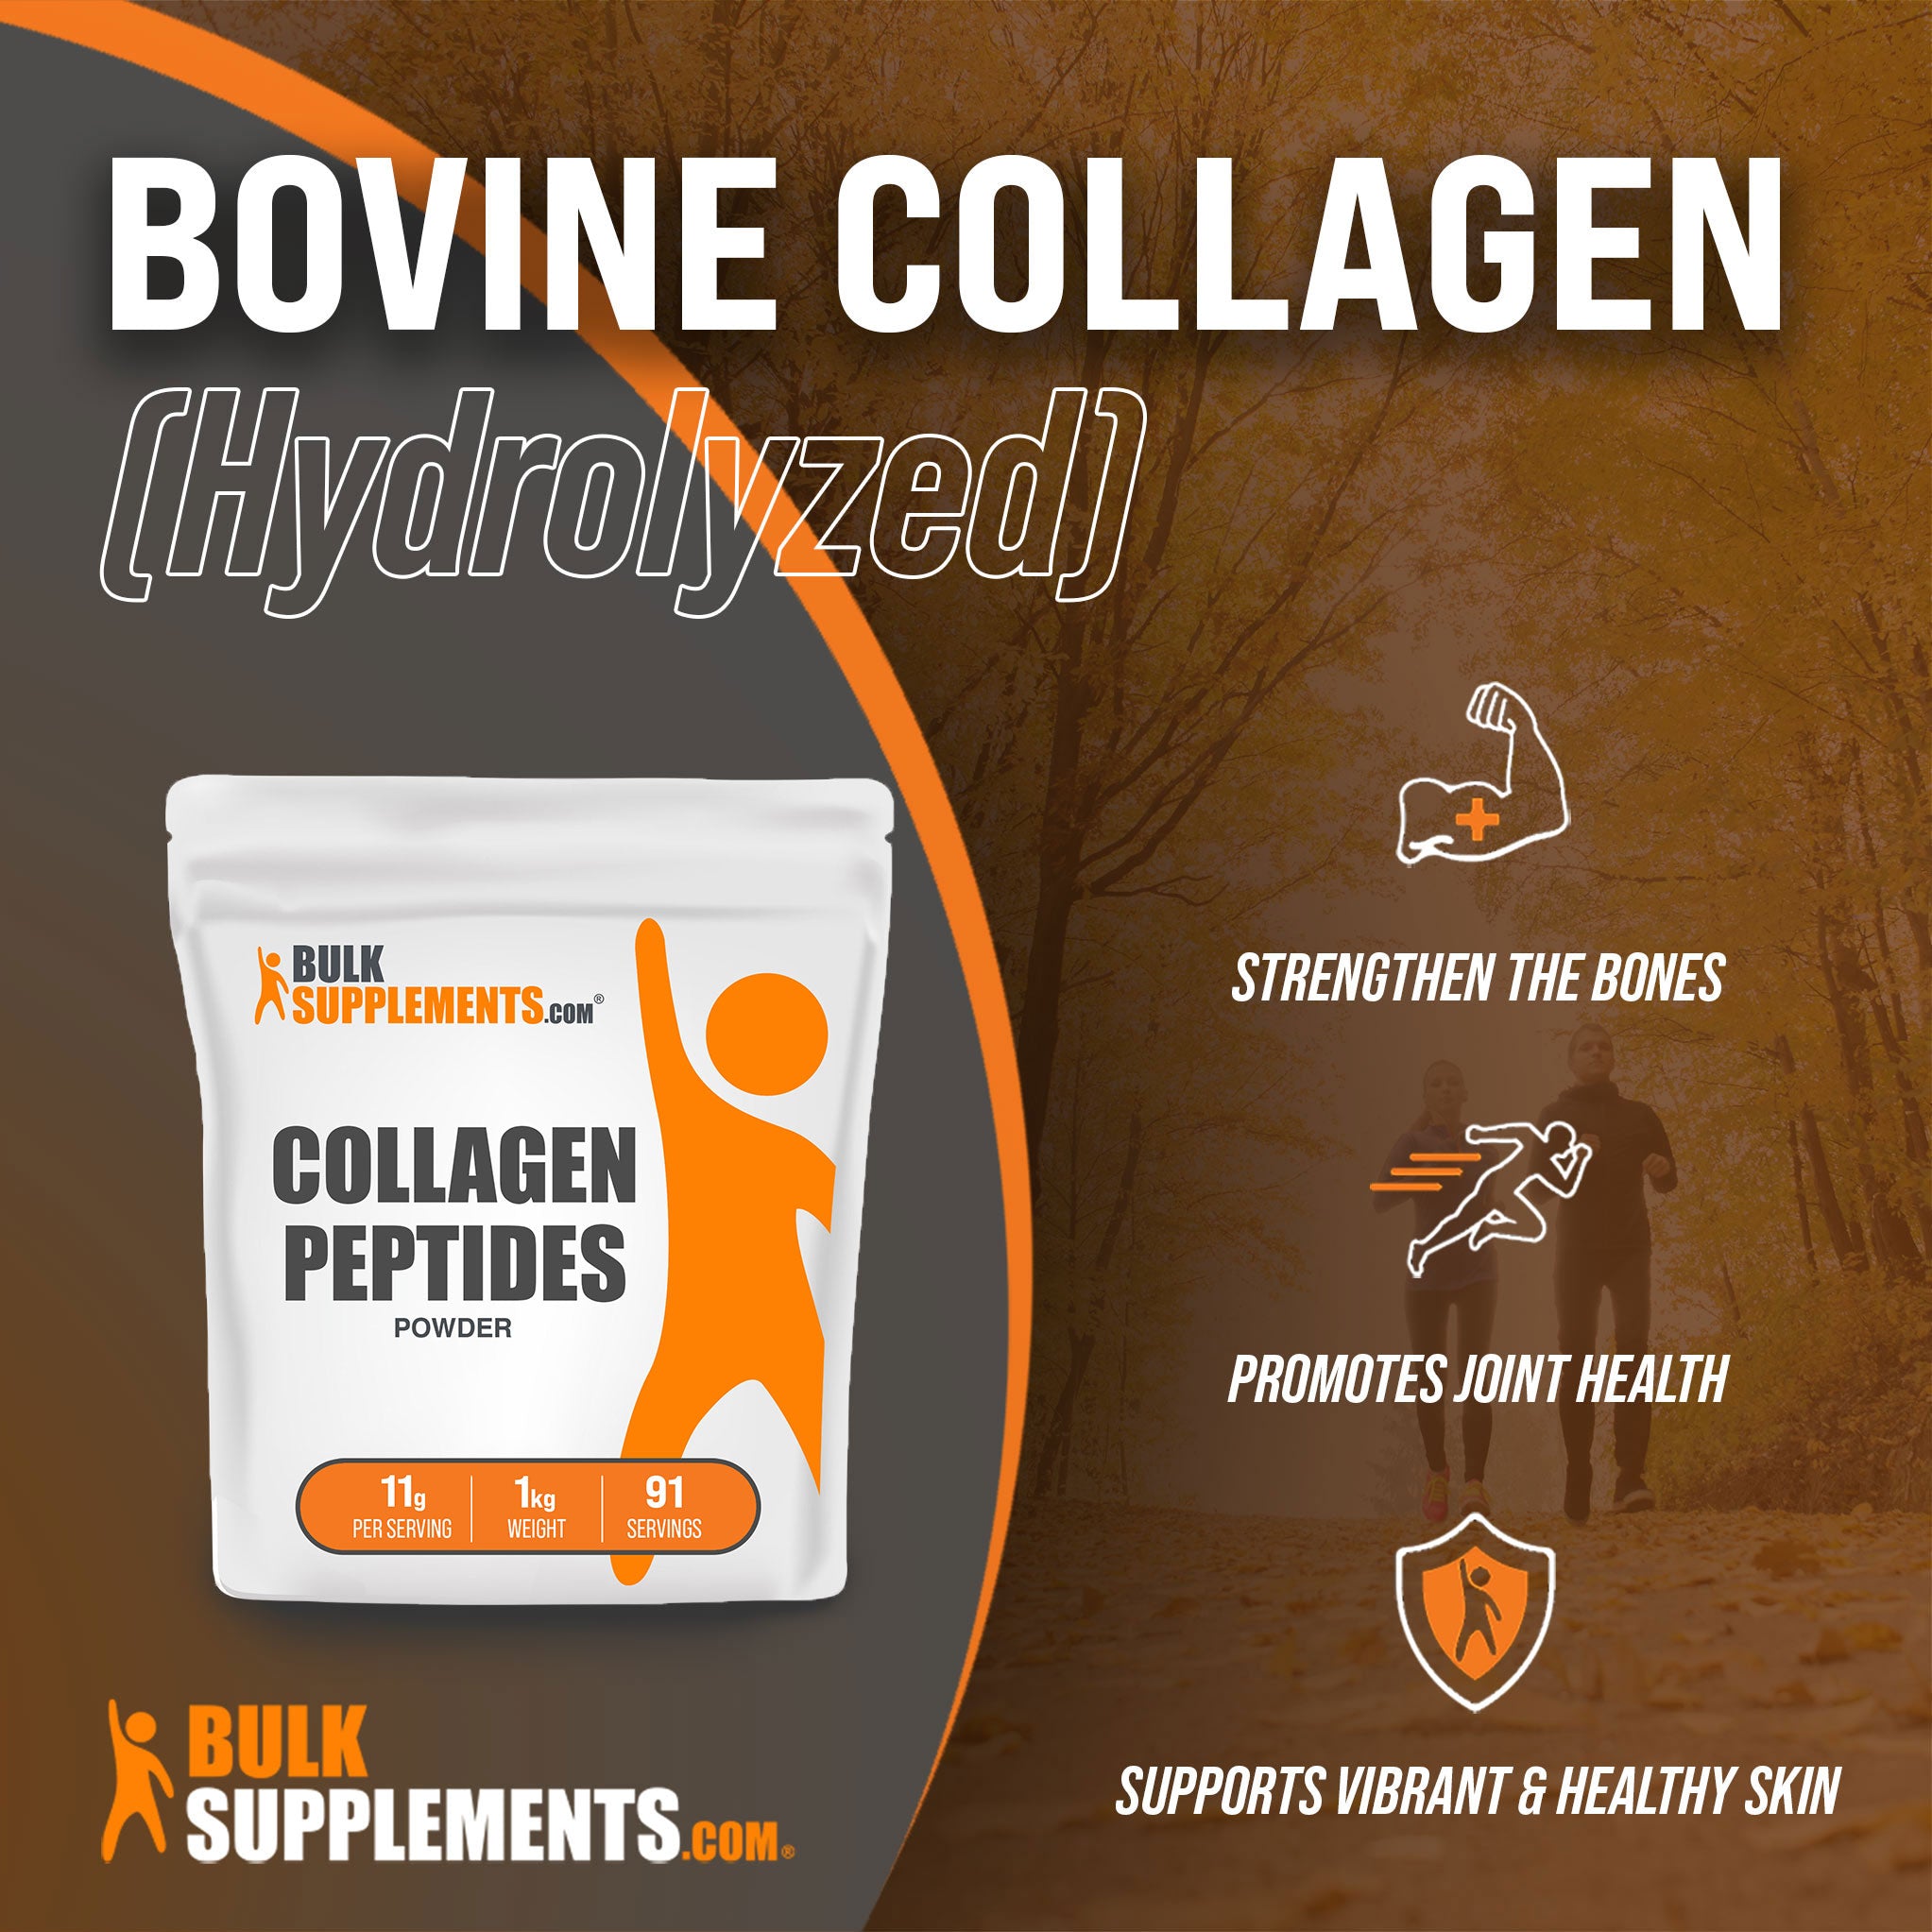 Benefits of Bovine Collagen (Hydrolyzed); strengthen the bones, promotes joint health, supports vibrant and healthy skin